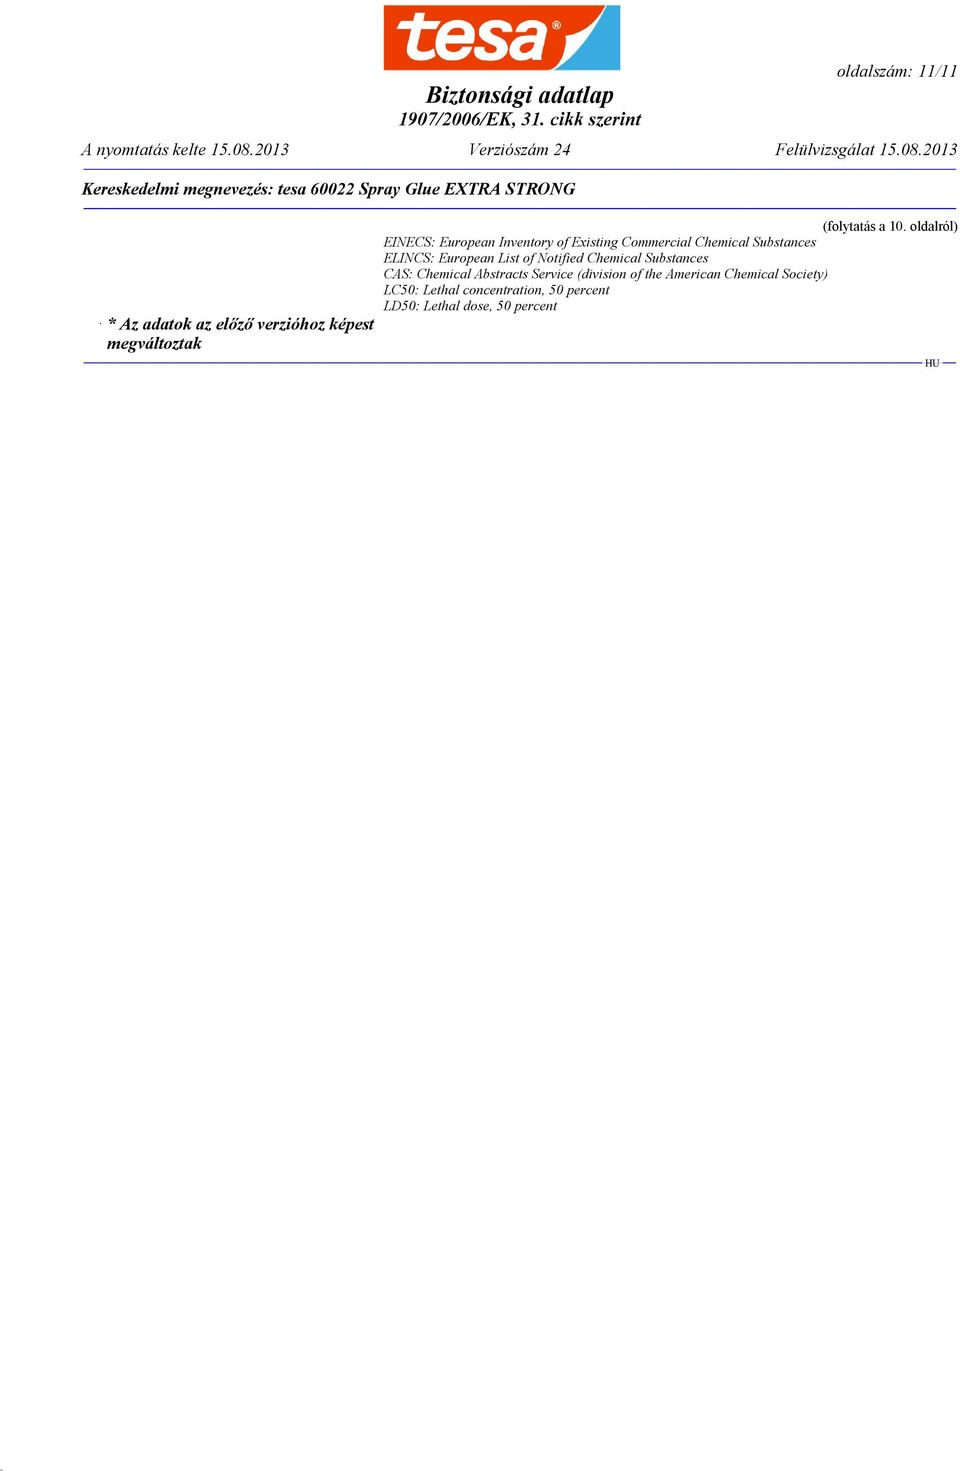 European List of otified Chemical Substances CAS: Chemical Abstracts Service (division of